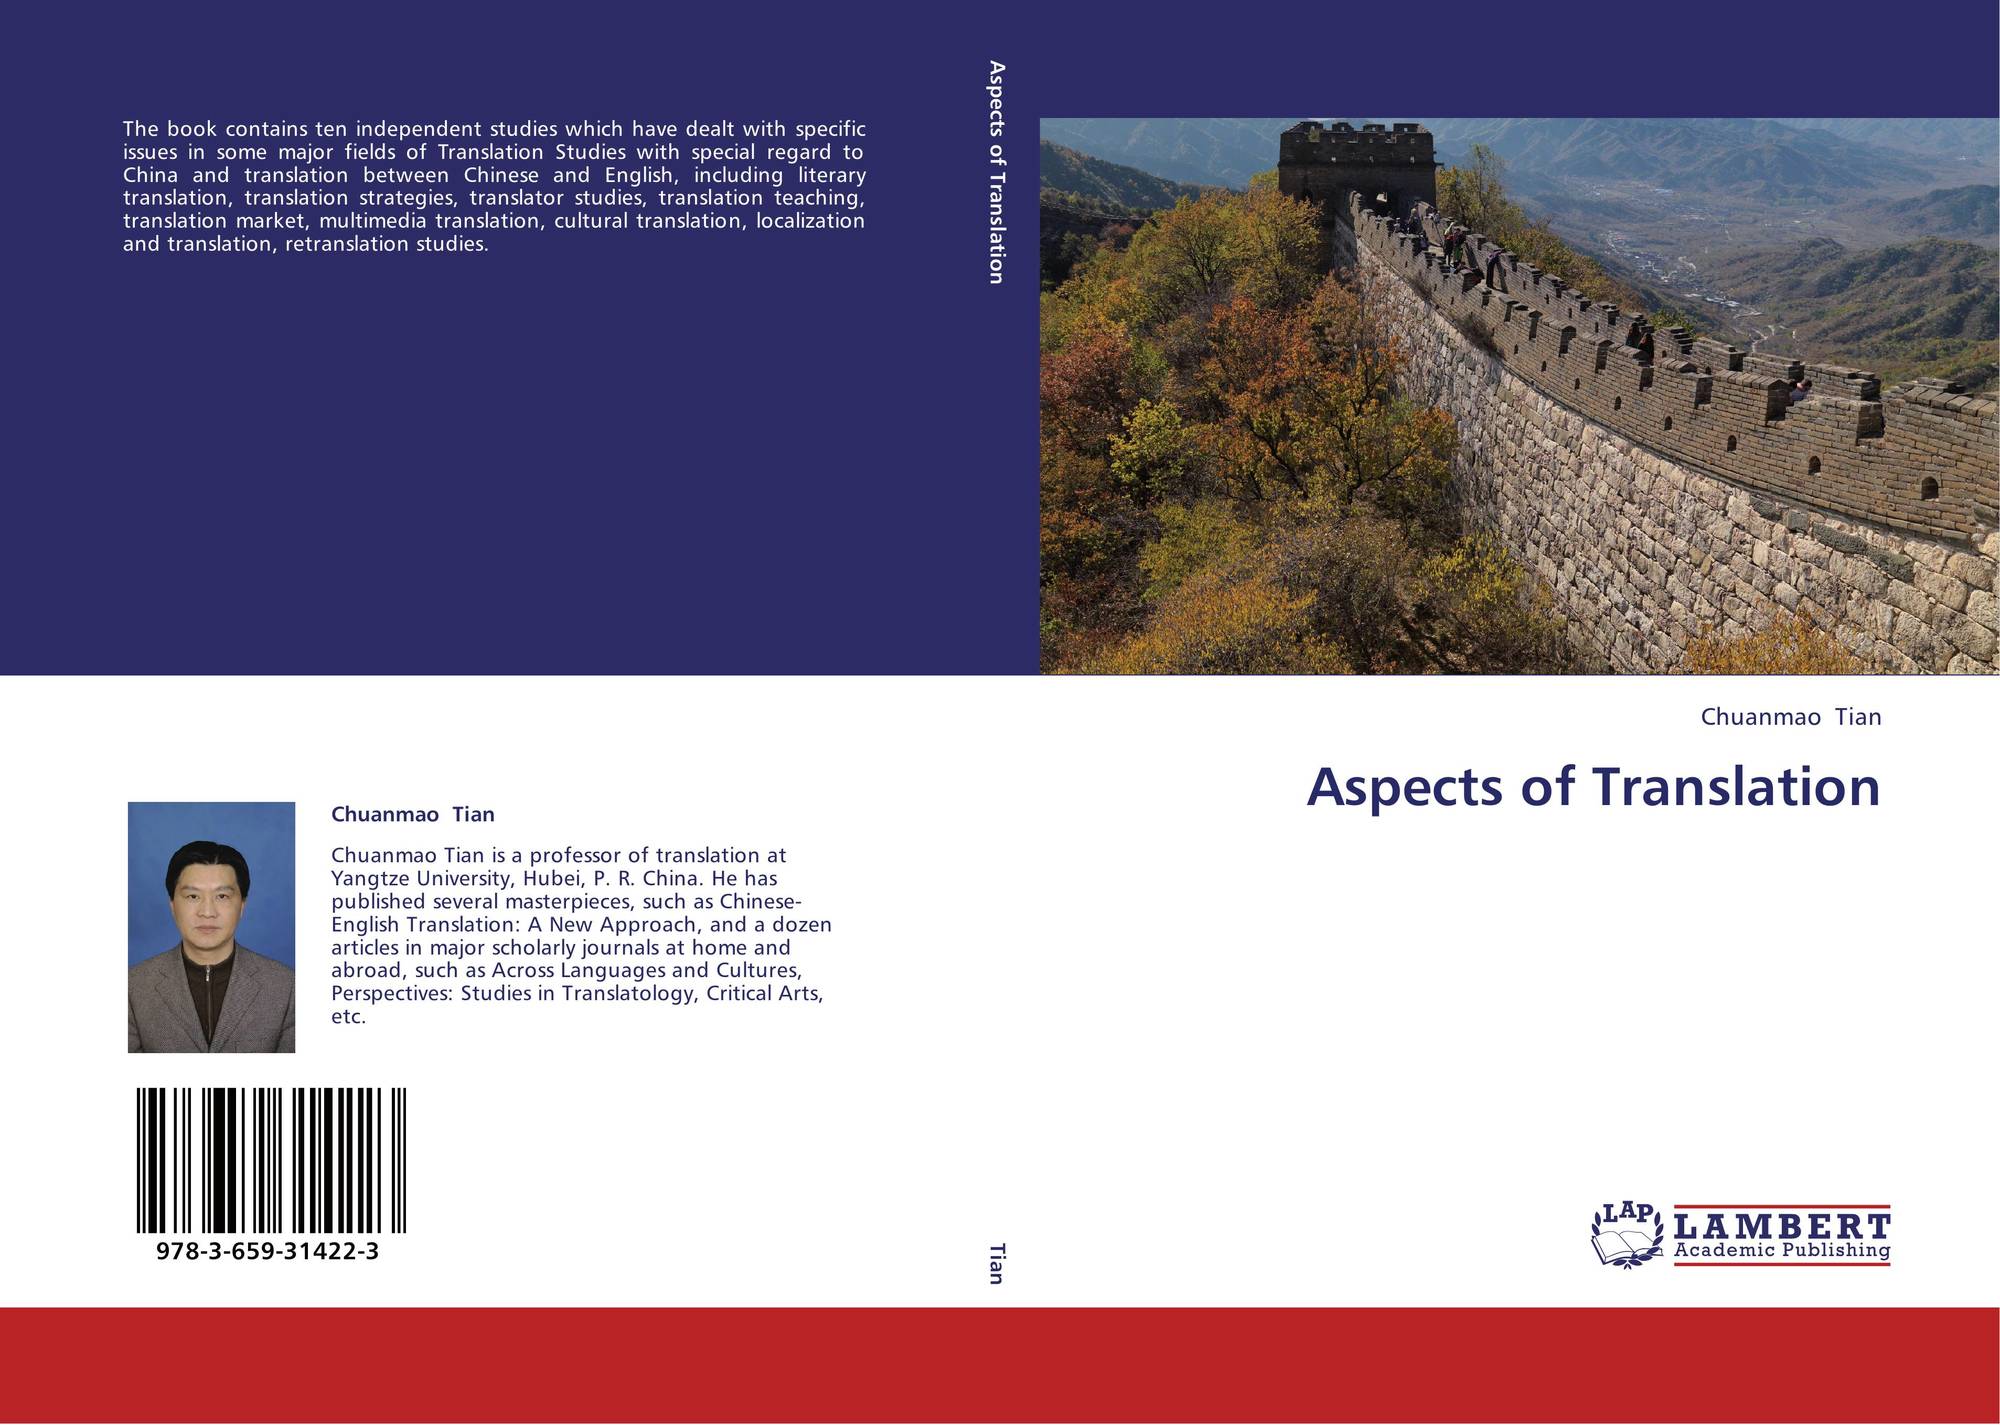 The paper deals with some aspects of. Literary translation перевод. James holmes Map of translation studies.